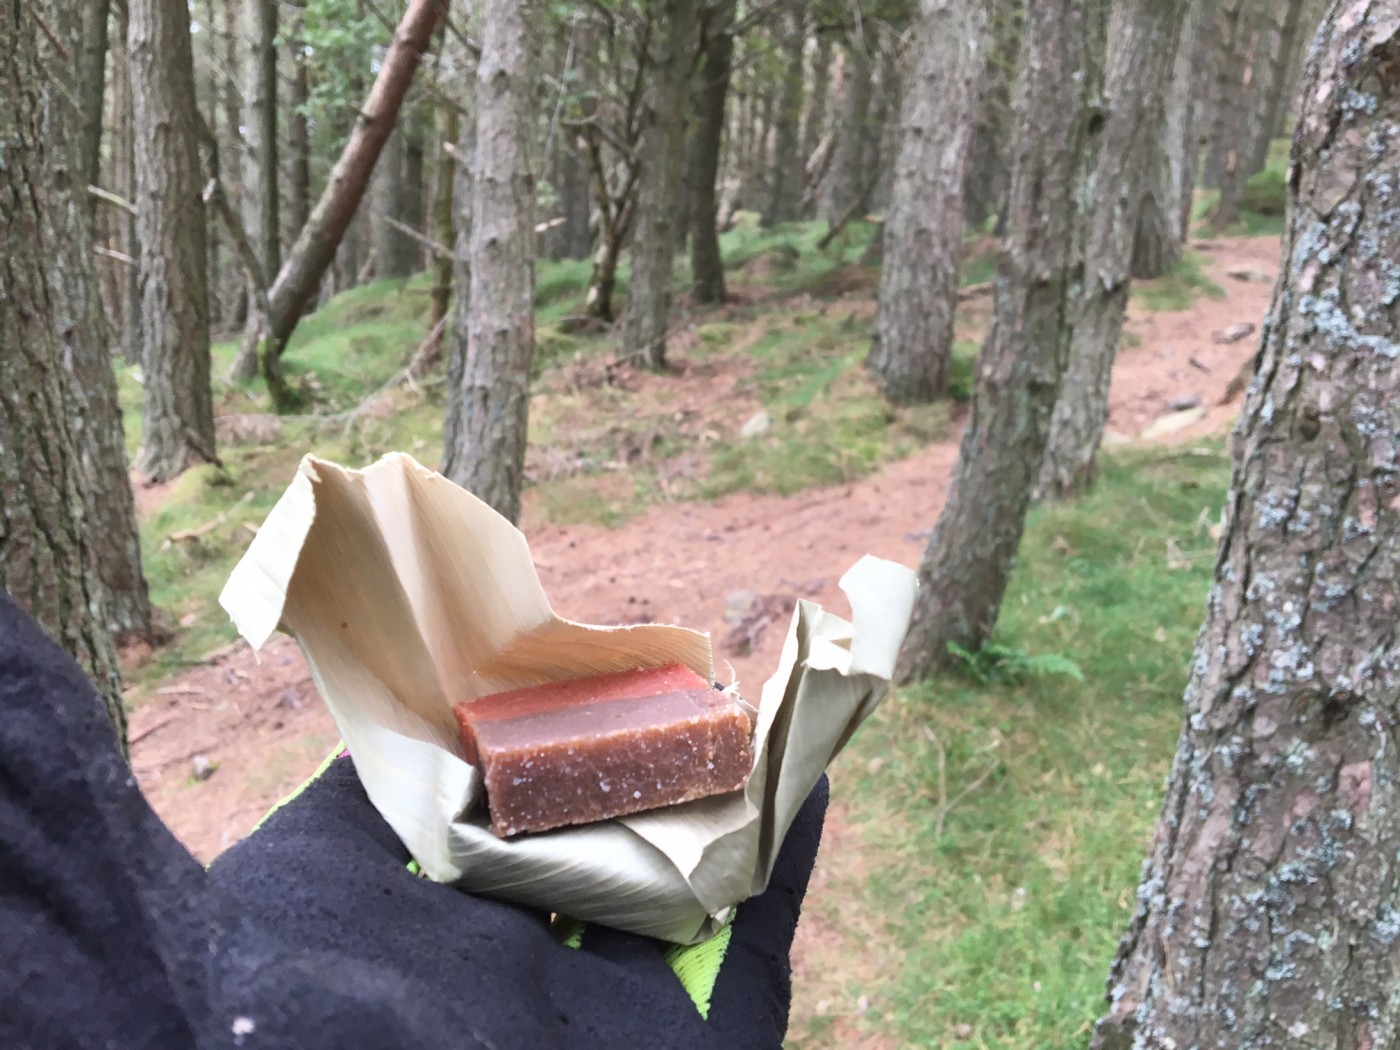 These are neat little parcels of energy – perfect for the trail. The coffee one came out on top for me!